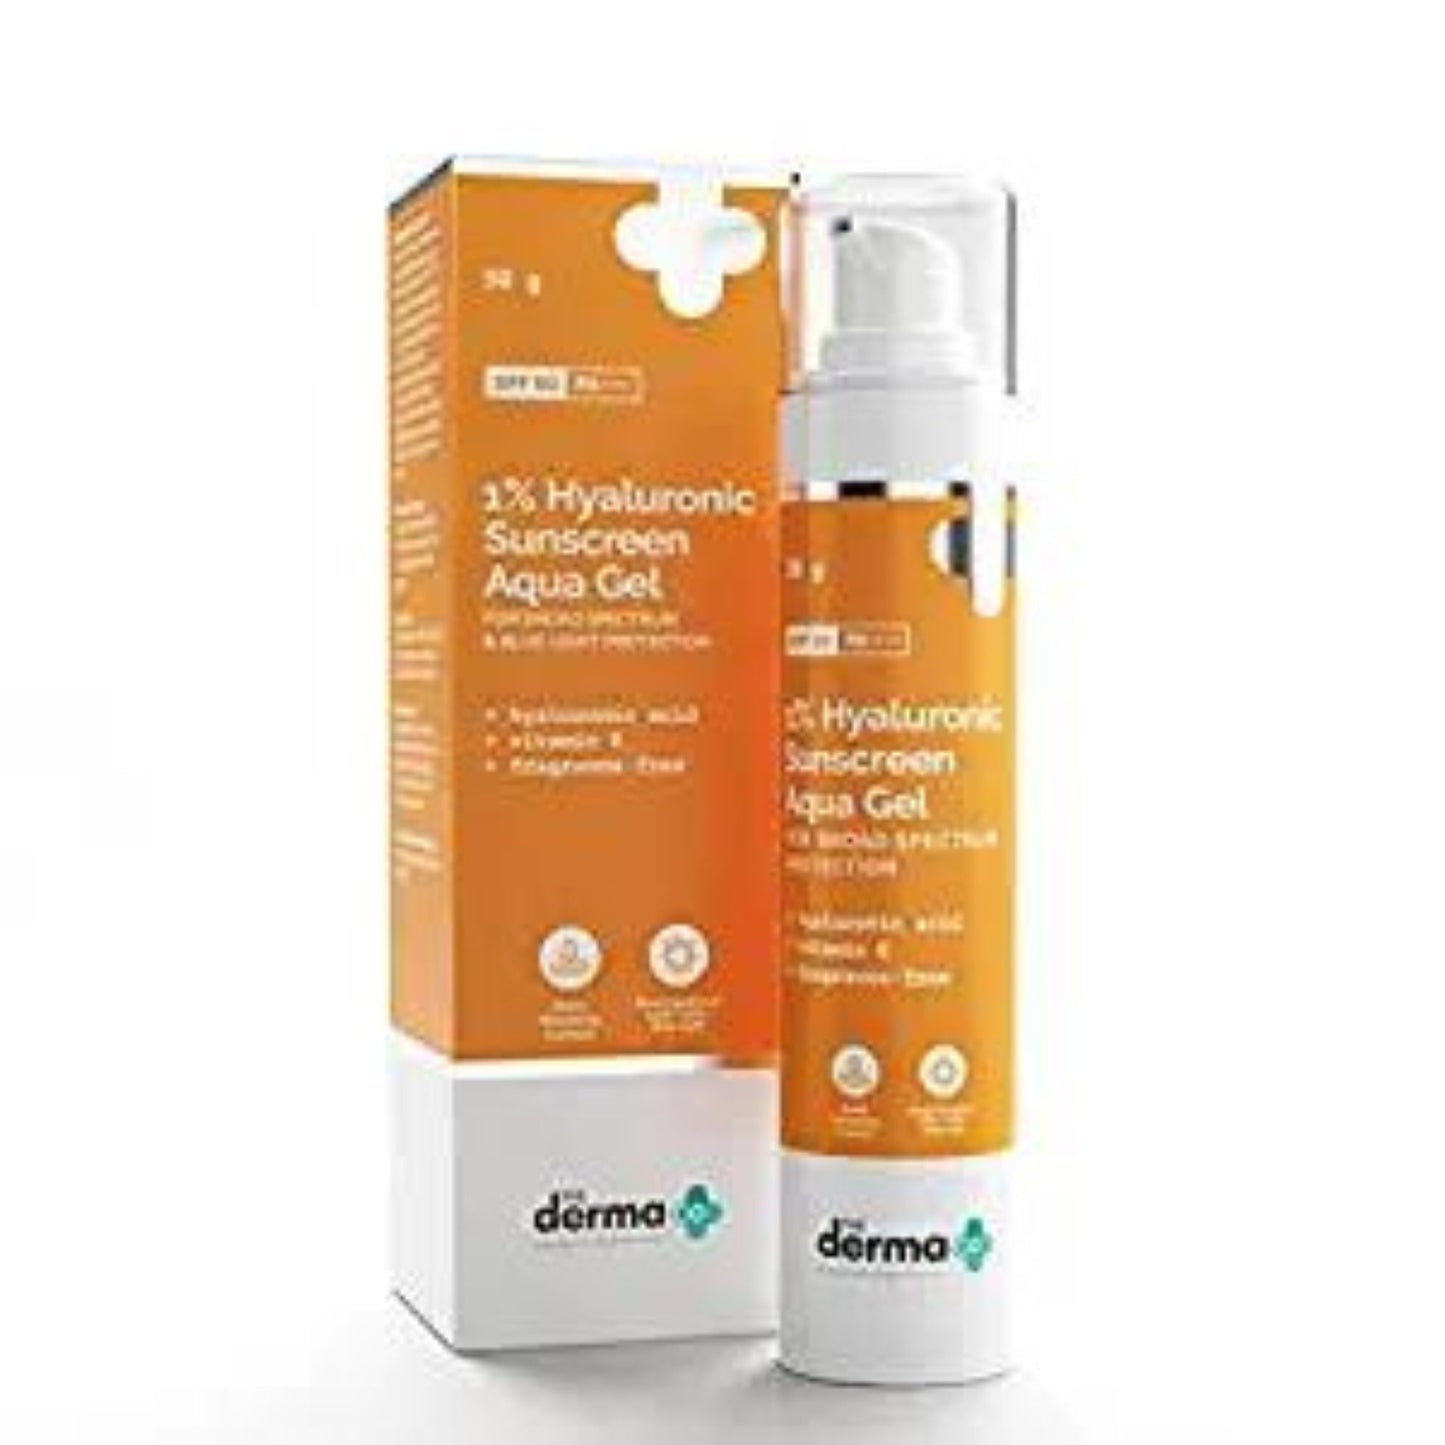 The Derma Co 1% Hyaluronic Sunscreen Aqua Ultra Light Gel with SPF 50 PA++++ For Broad Spectrum, UV A,